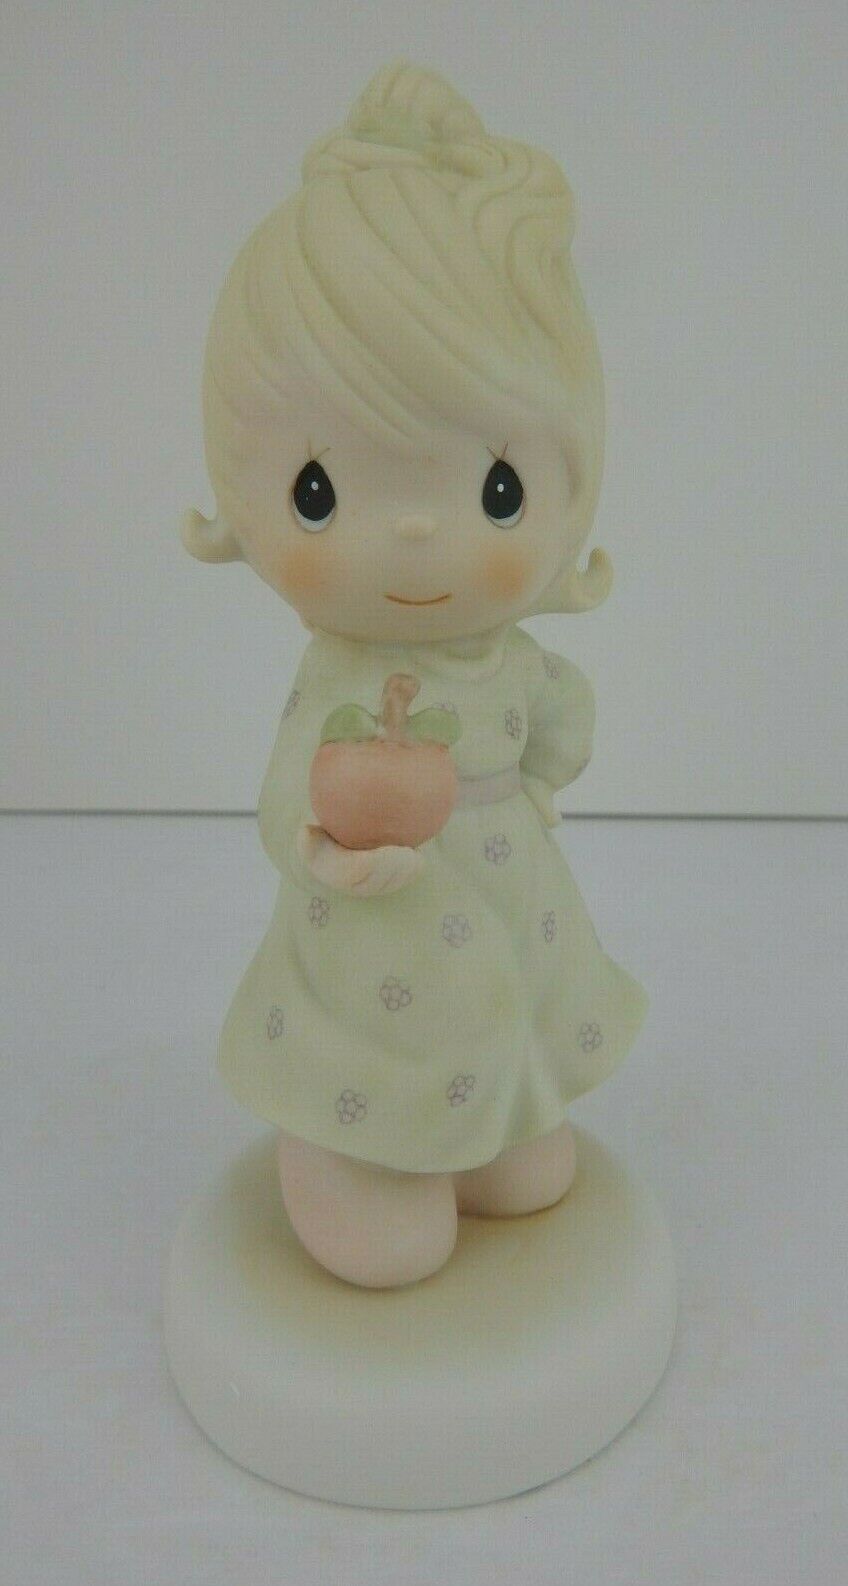 Old Stock Precious Moments Yield Not To Temptation Figurine #521310 w/Box (786